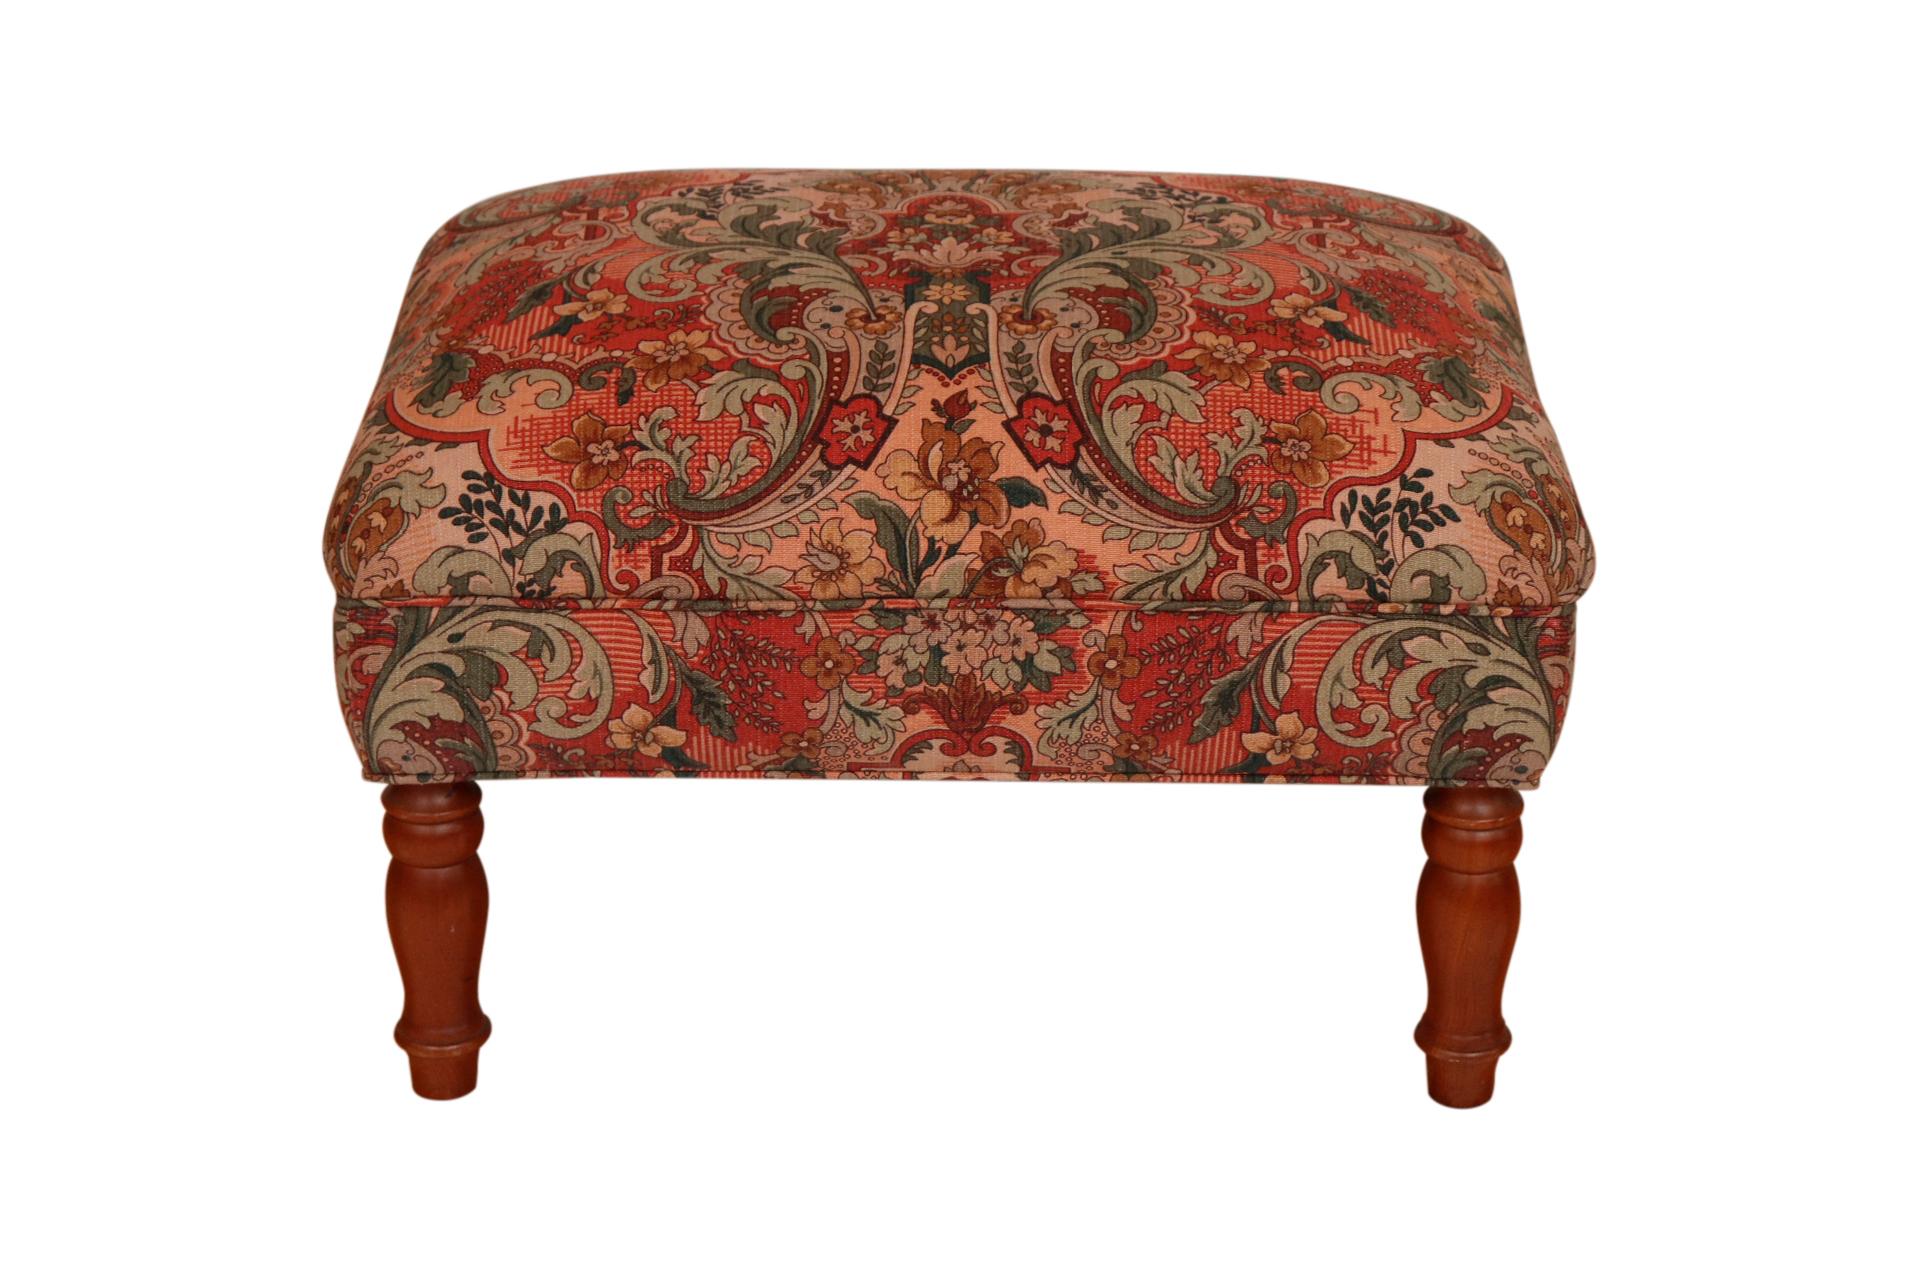 An English style ottoman. Upholstered in a rich Ishana style floral printed cotton with bunches of acanthus foliage repeated in red, sage, mocha and olive on a blush ground. Stands on turned wooden legs finished in blunt arrow feet.